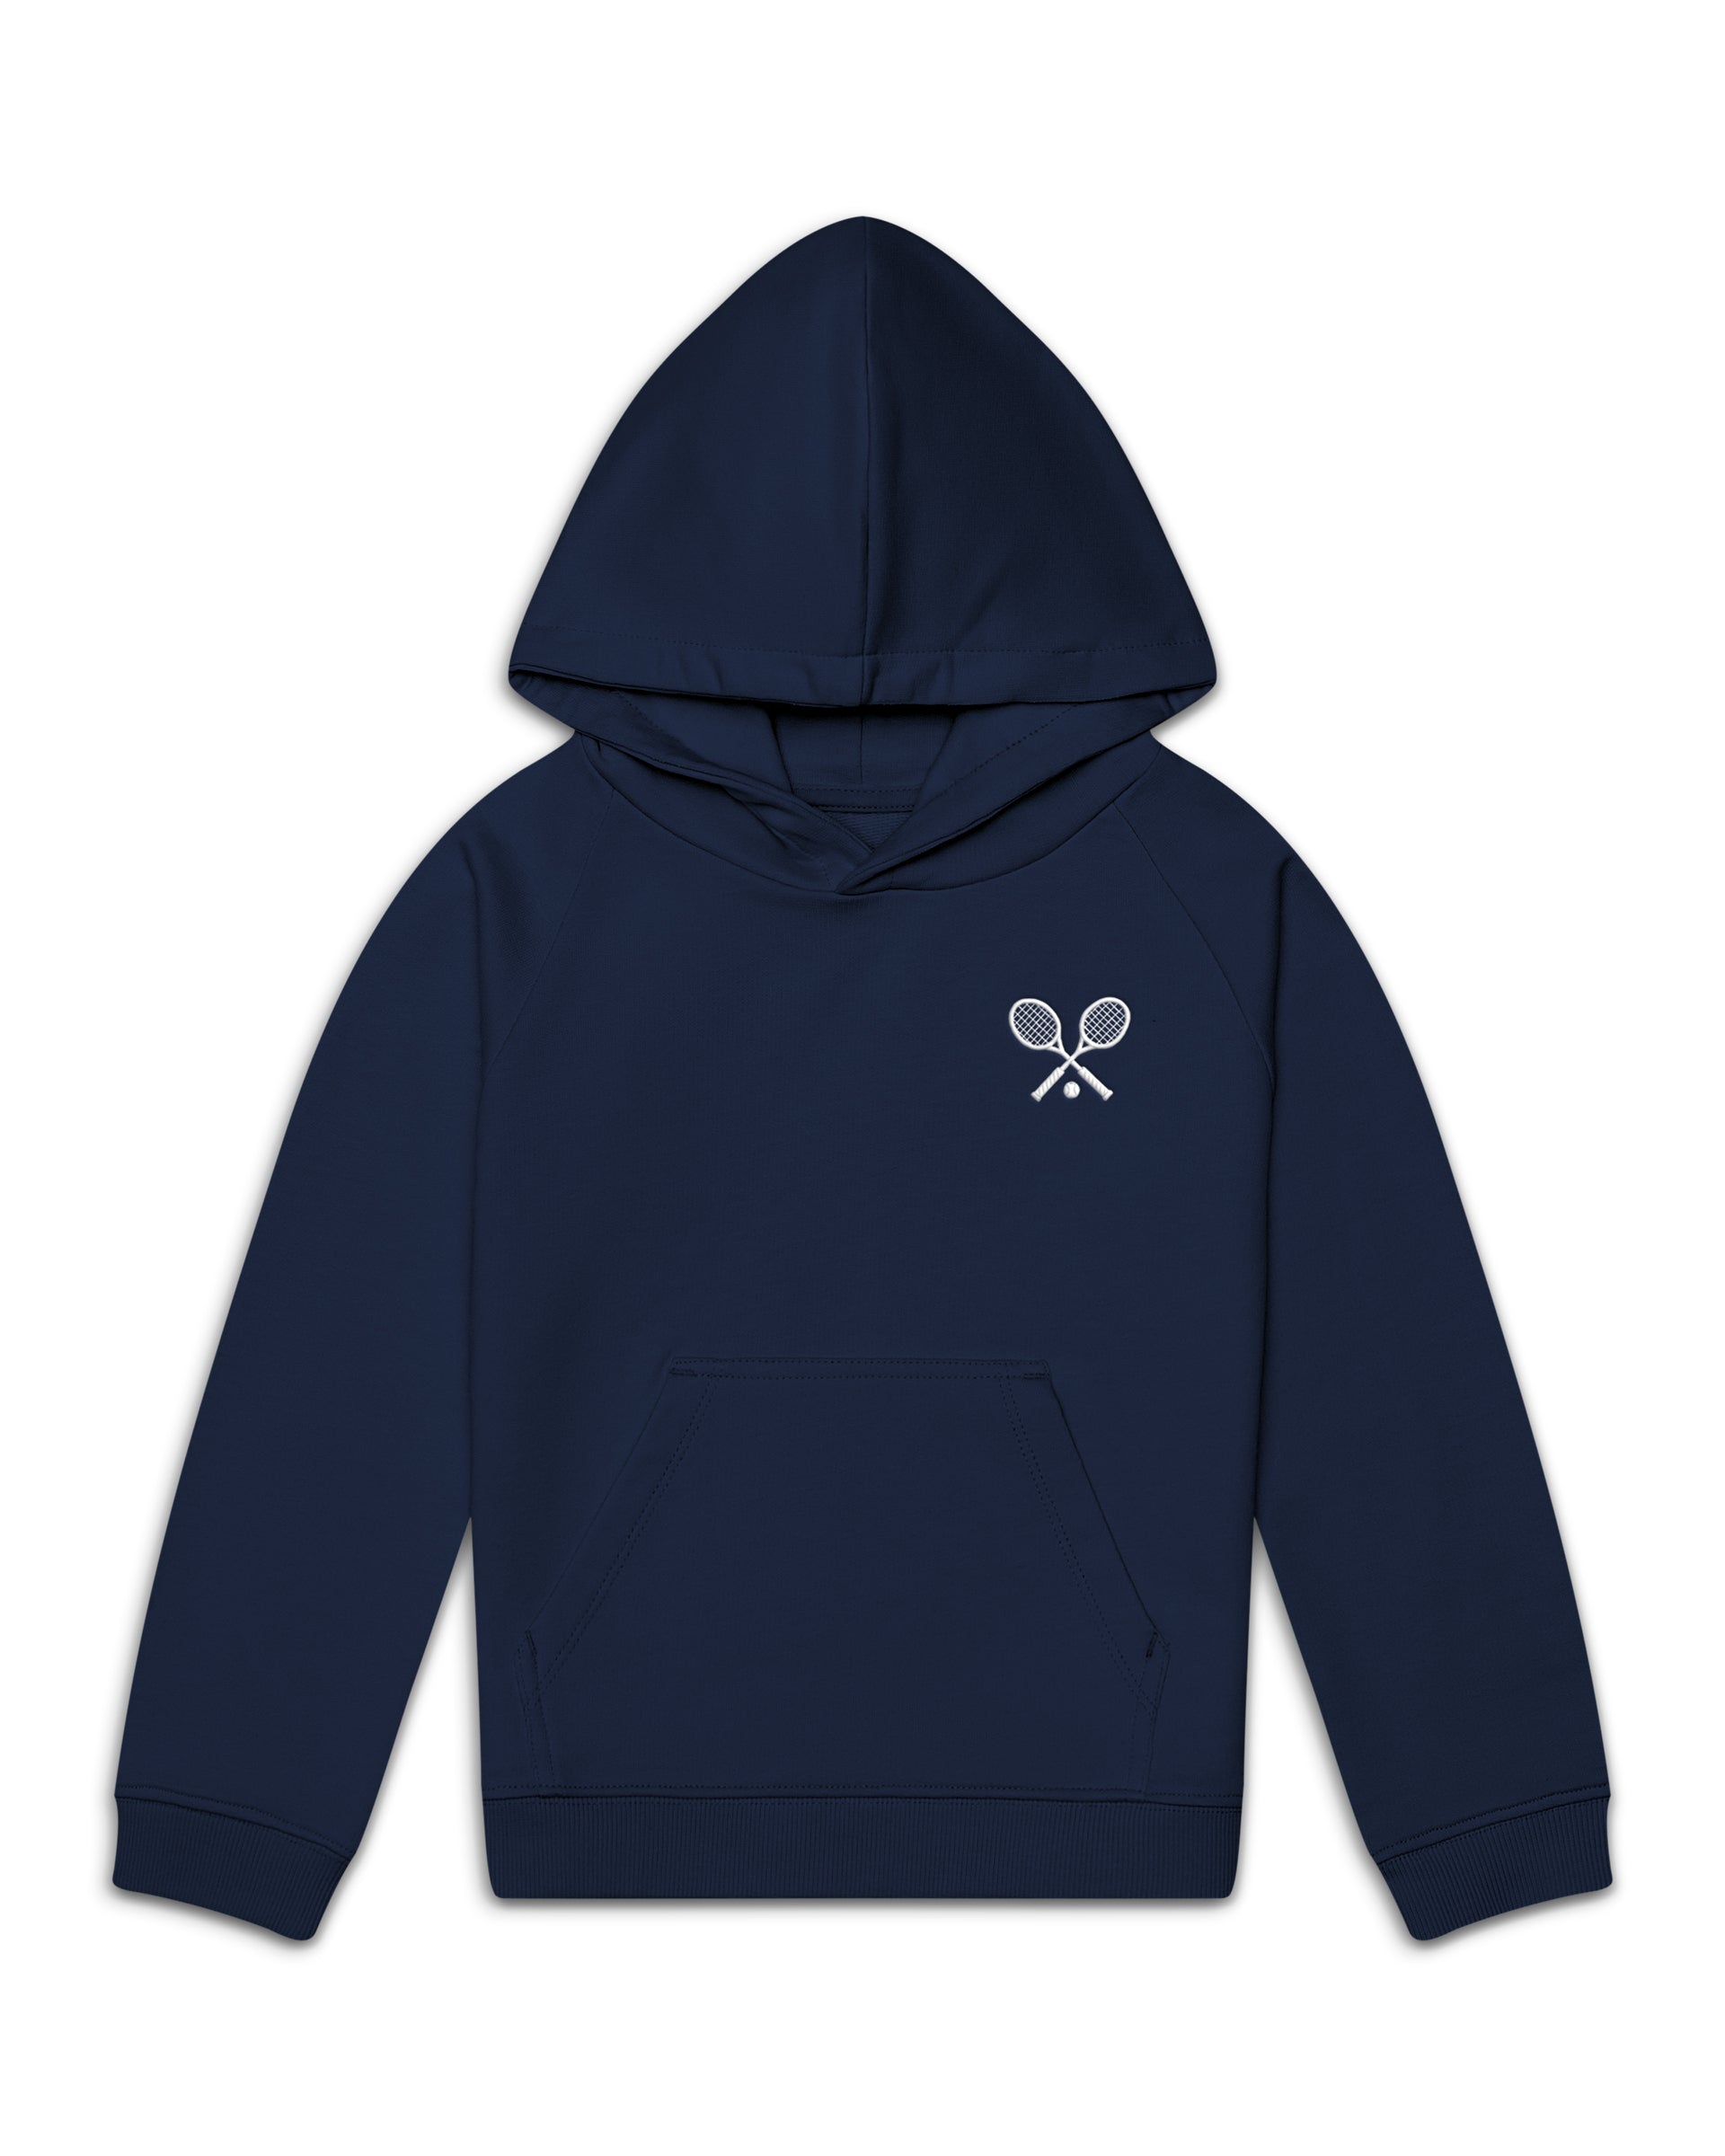 The Organic Embroidered Hoodie Sweatshirt [Navy with White Tennis]